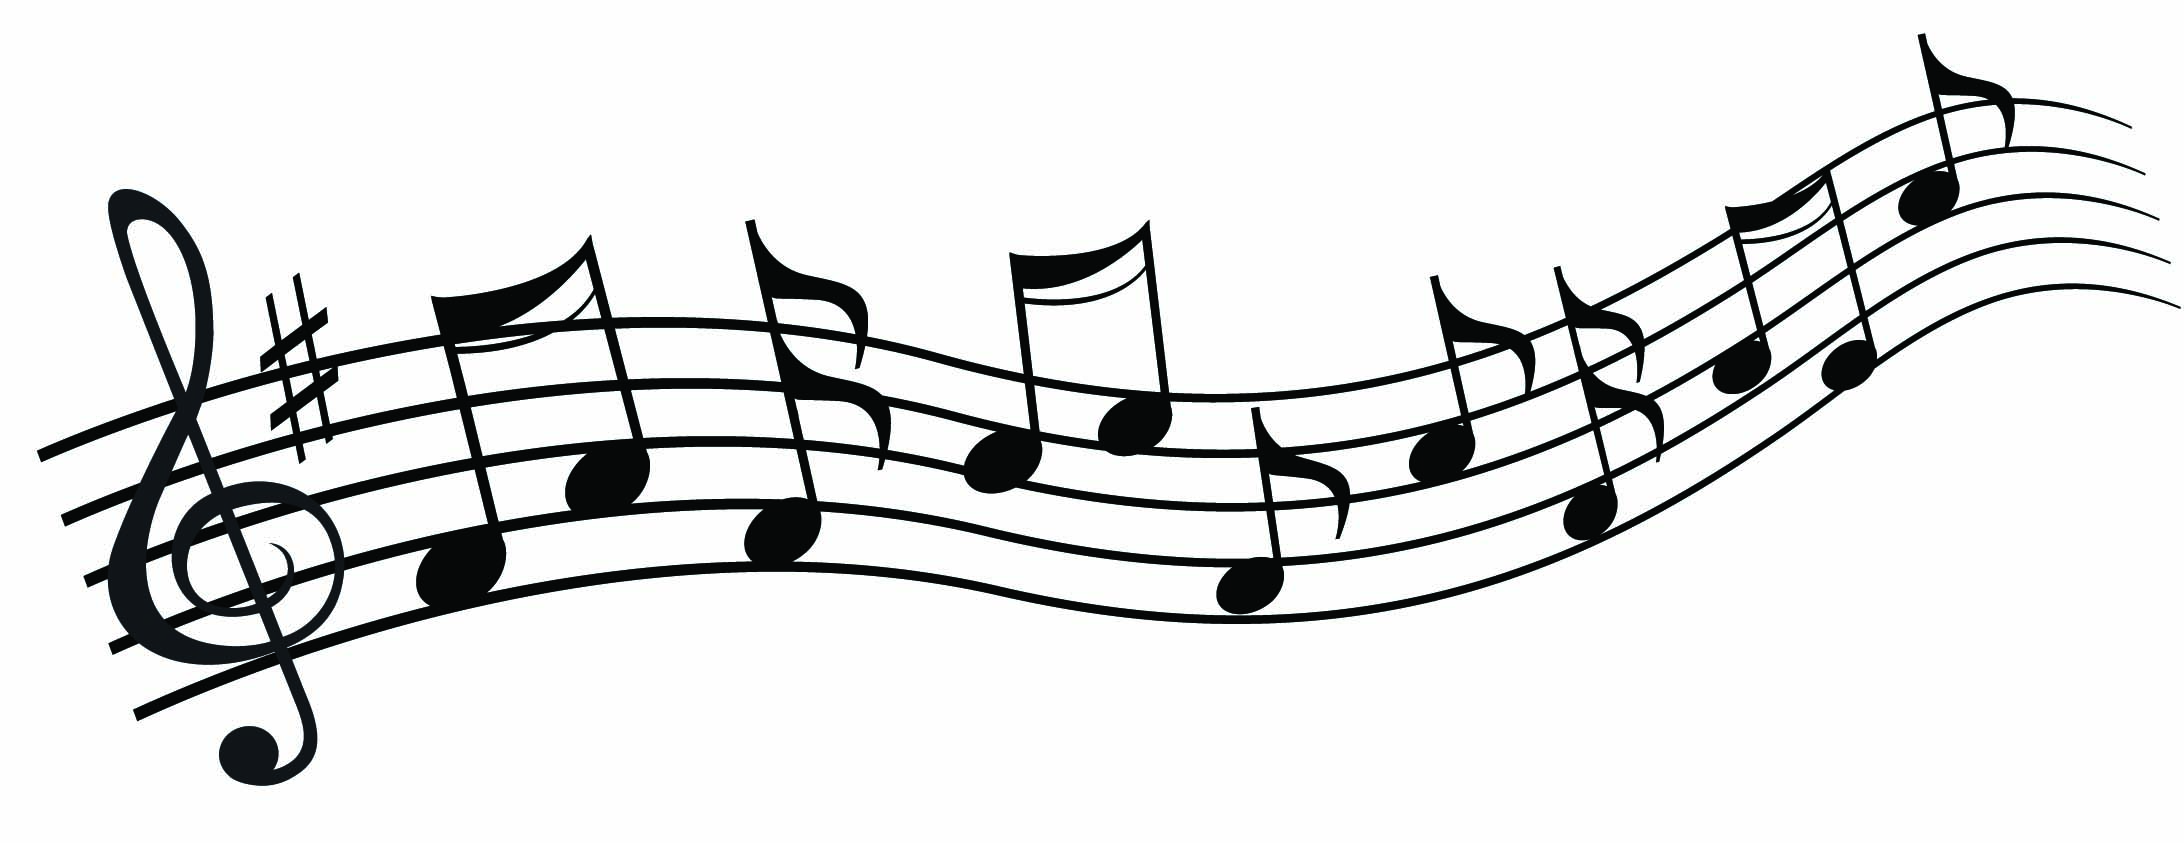 Free clip art musical notes